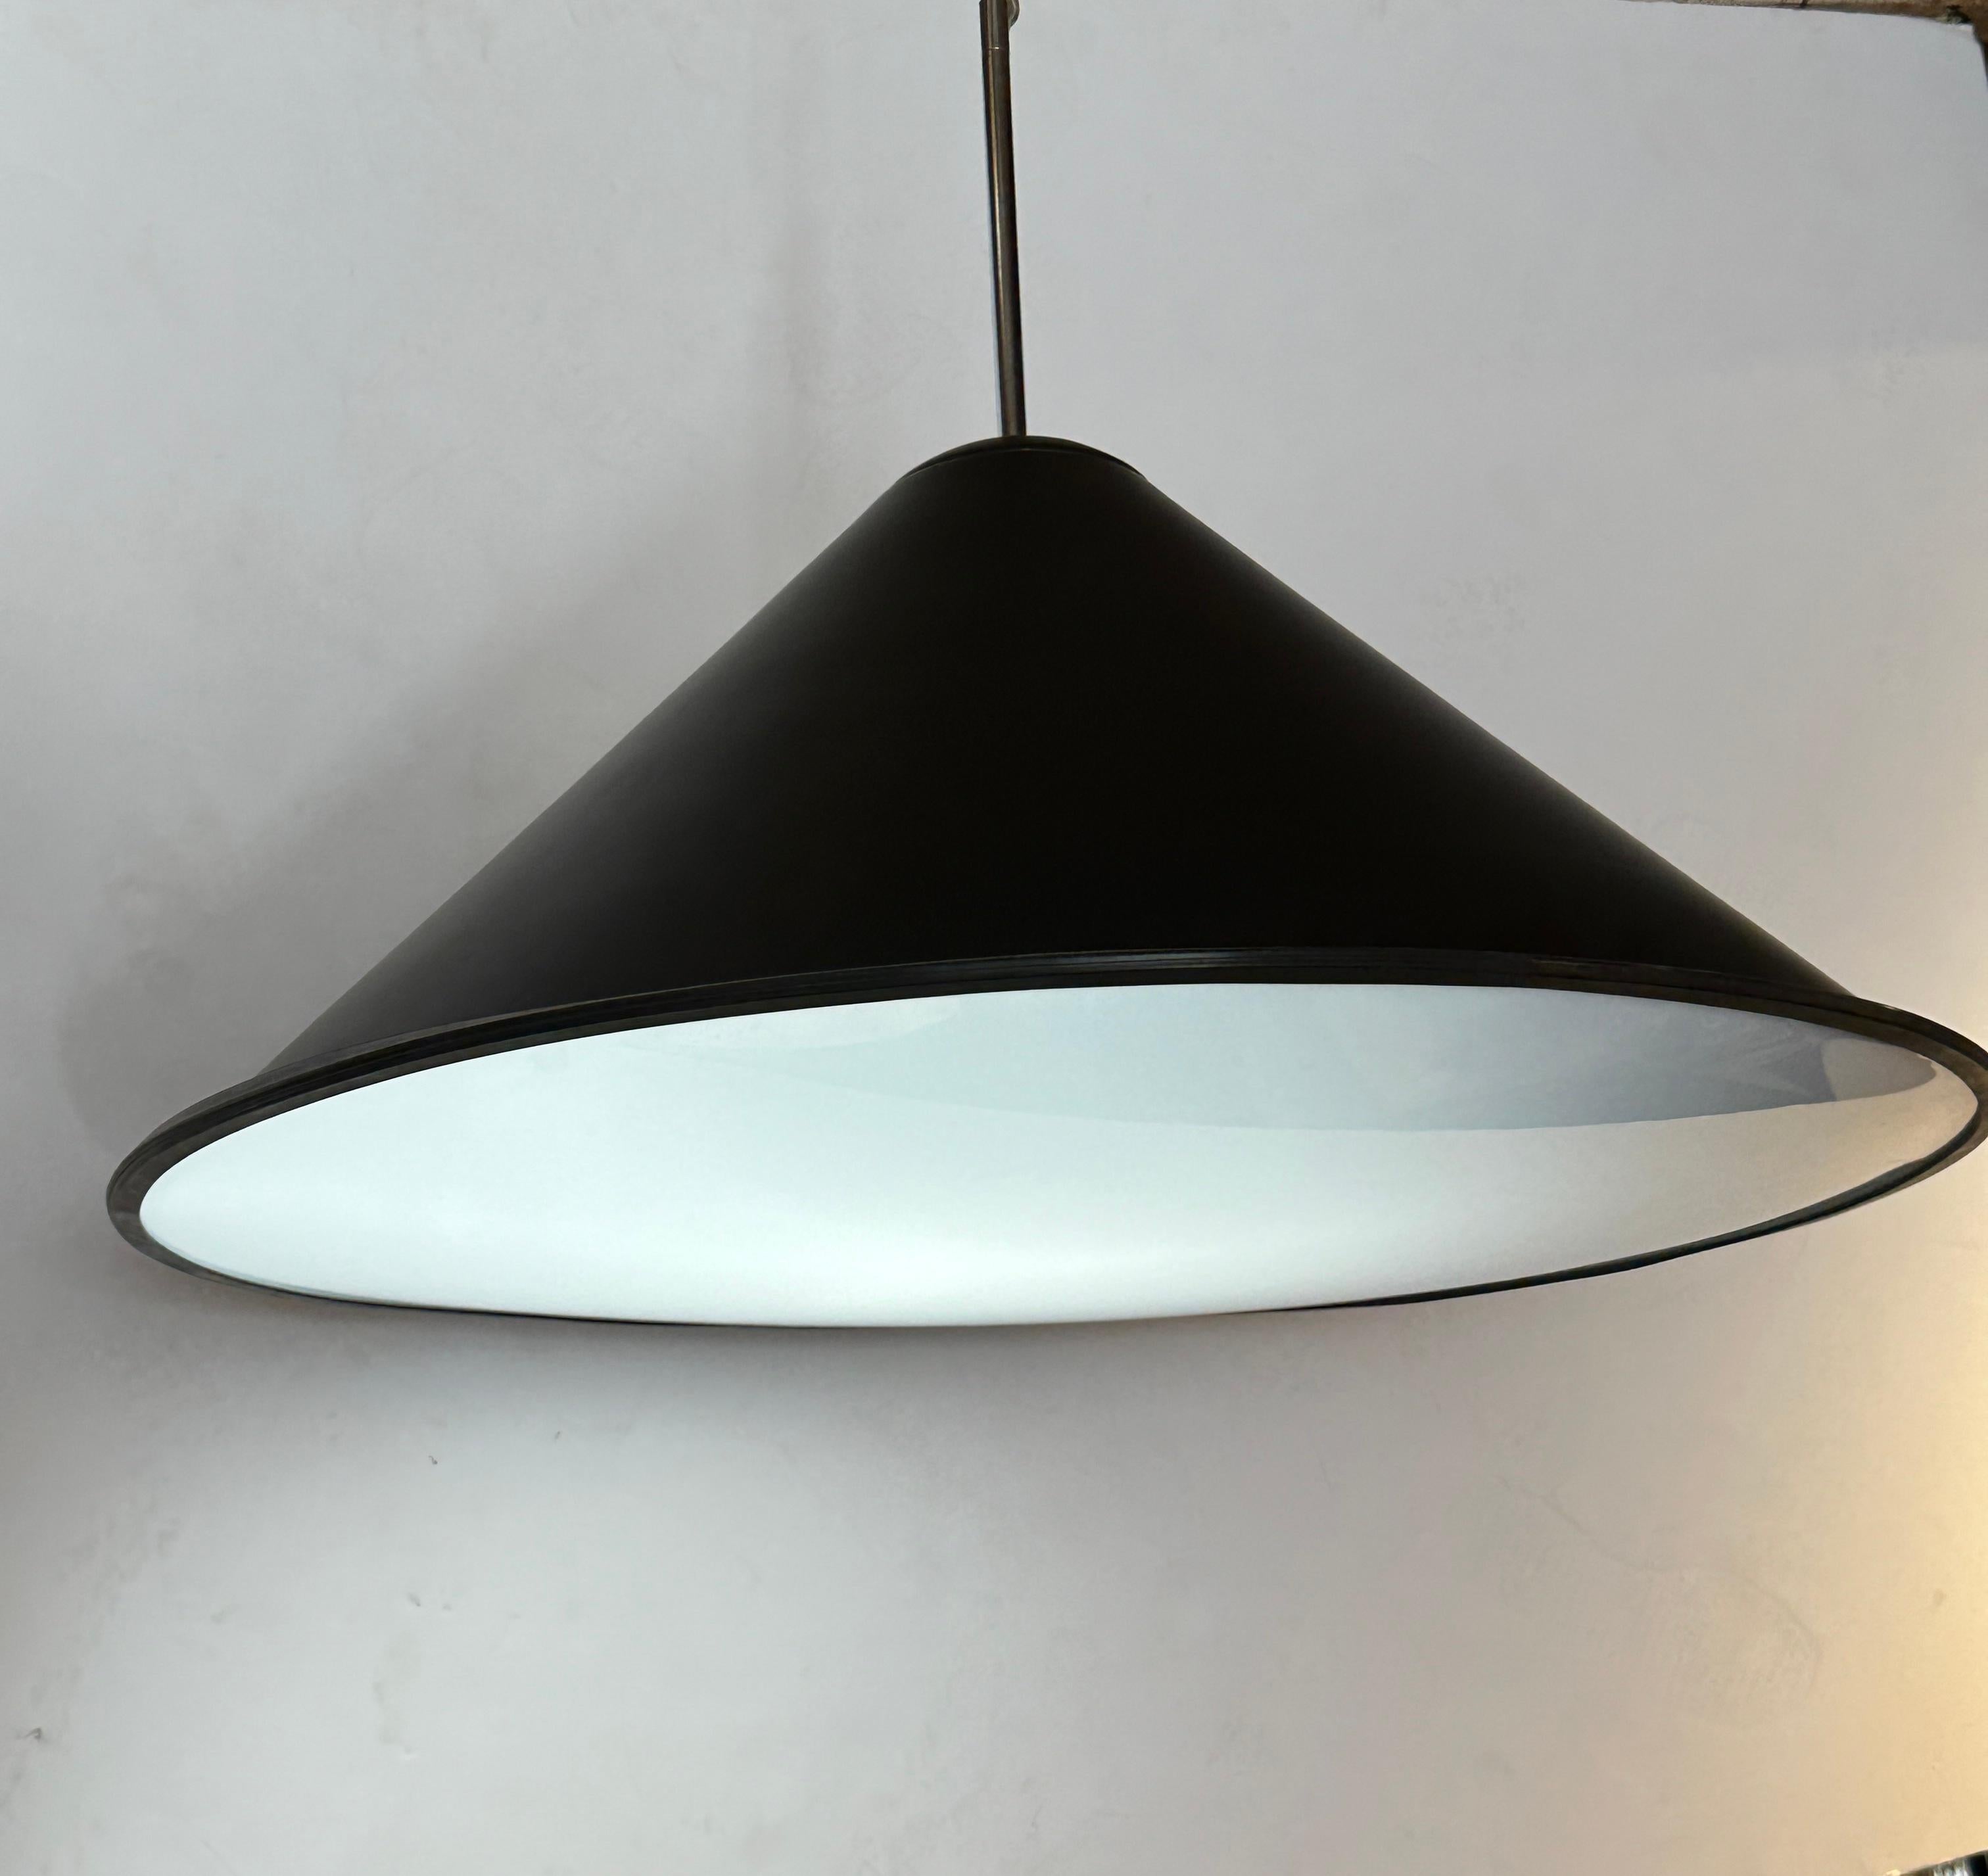 The Tom Dixon large pendant light features a deep, lustrous black lacquer shade and a frosted plexiglass screen which filters the light and creates a warm inviting atmosphere. The pendant light is crafted with exceptional attention to detail,